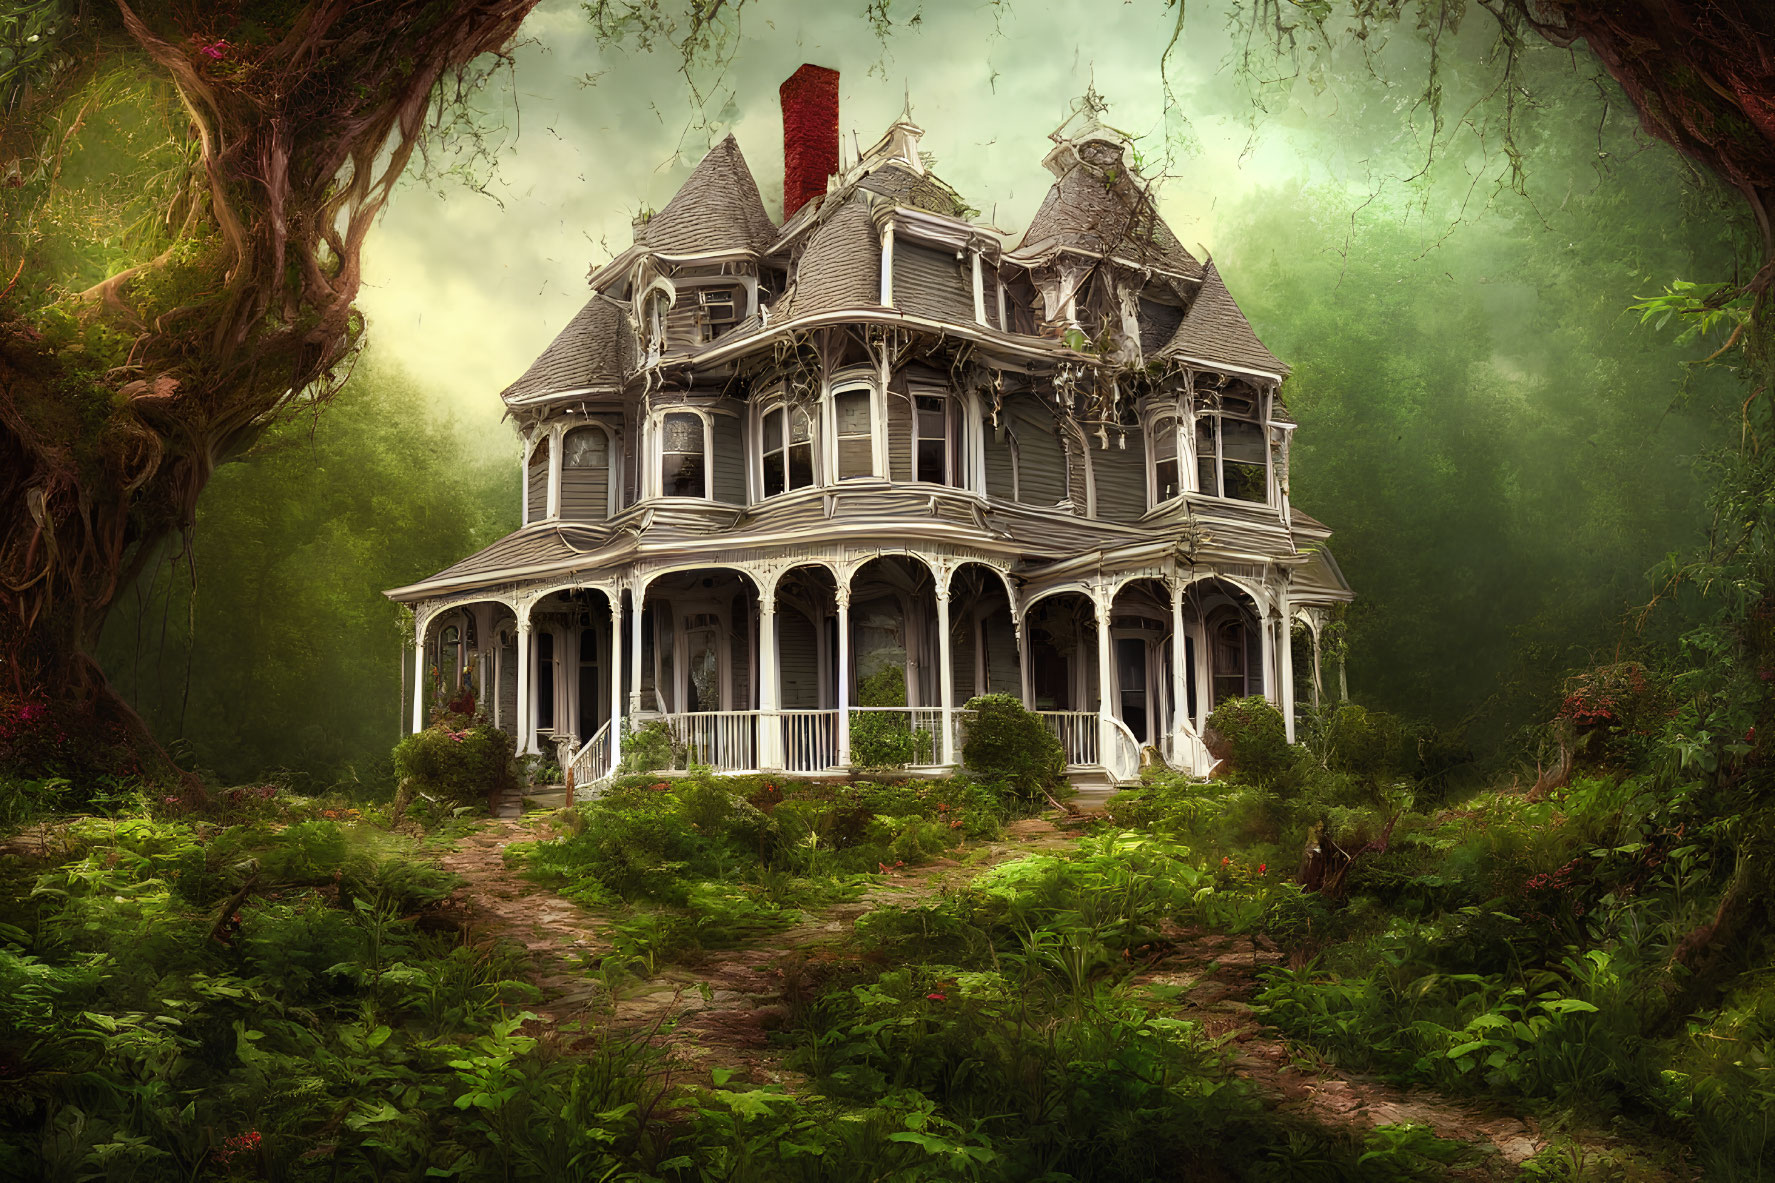 Eerie Victorian mansion in overgrown greenery and foggy backdrop